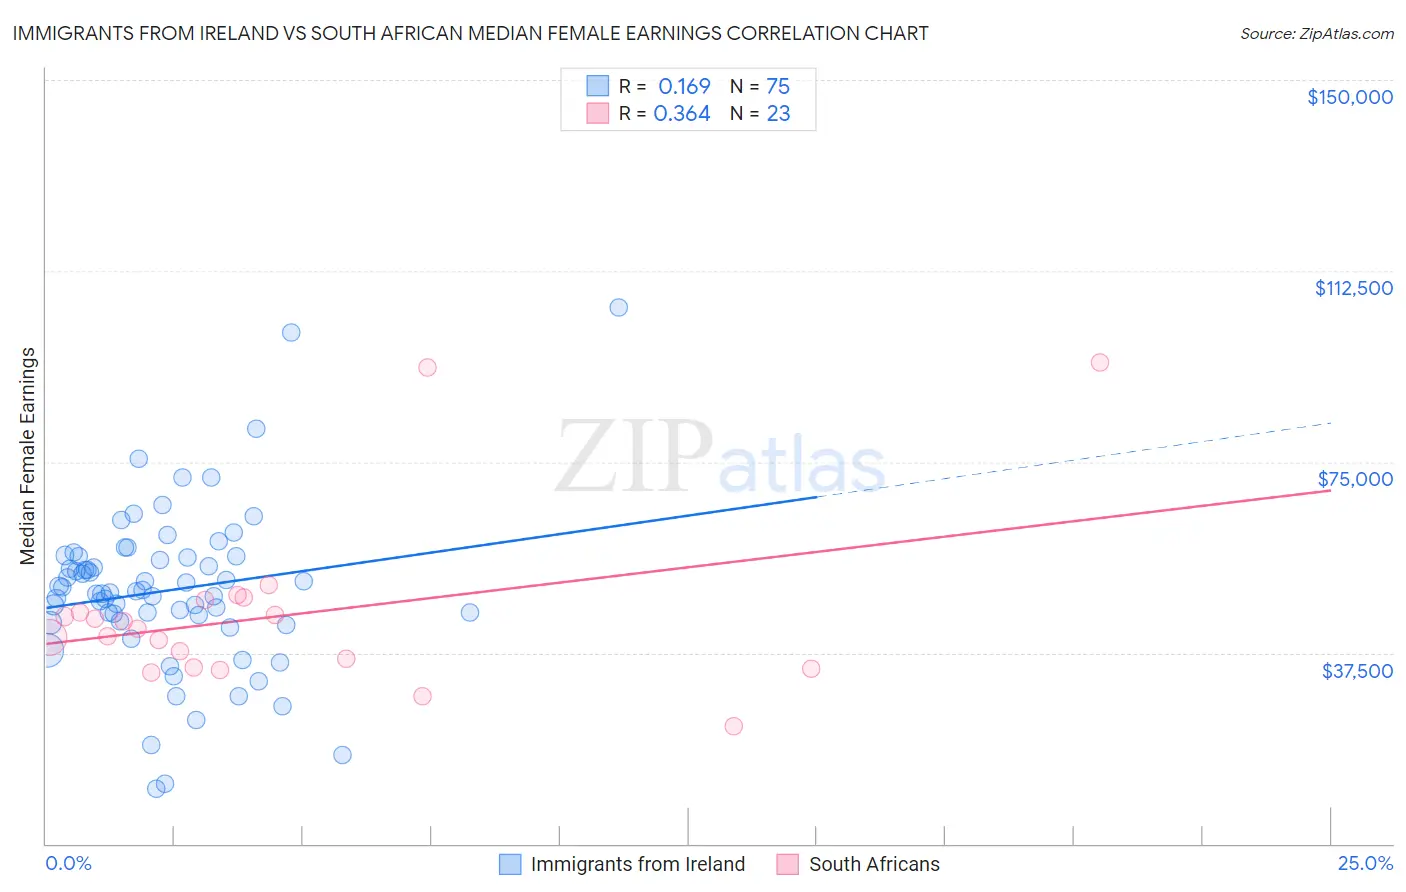 Immigrants from Ireland vs South African Median Female Earnings